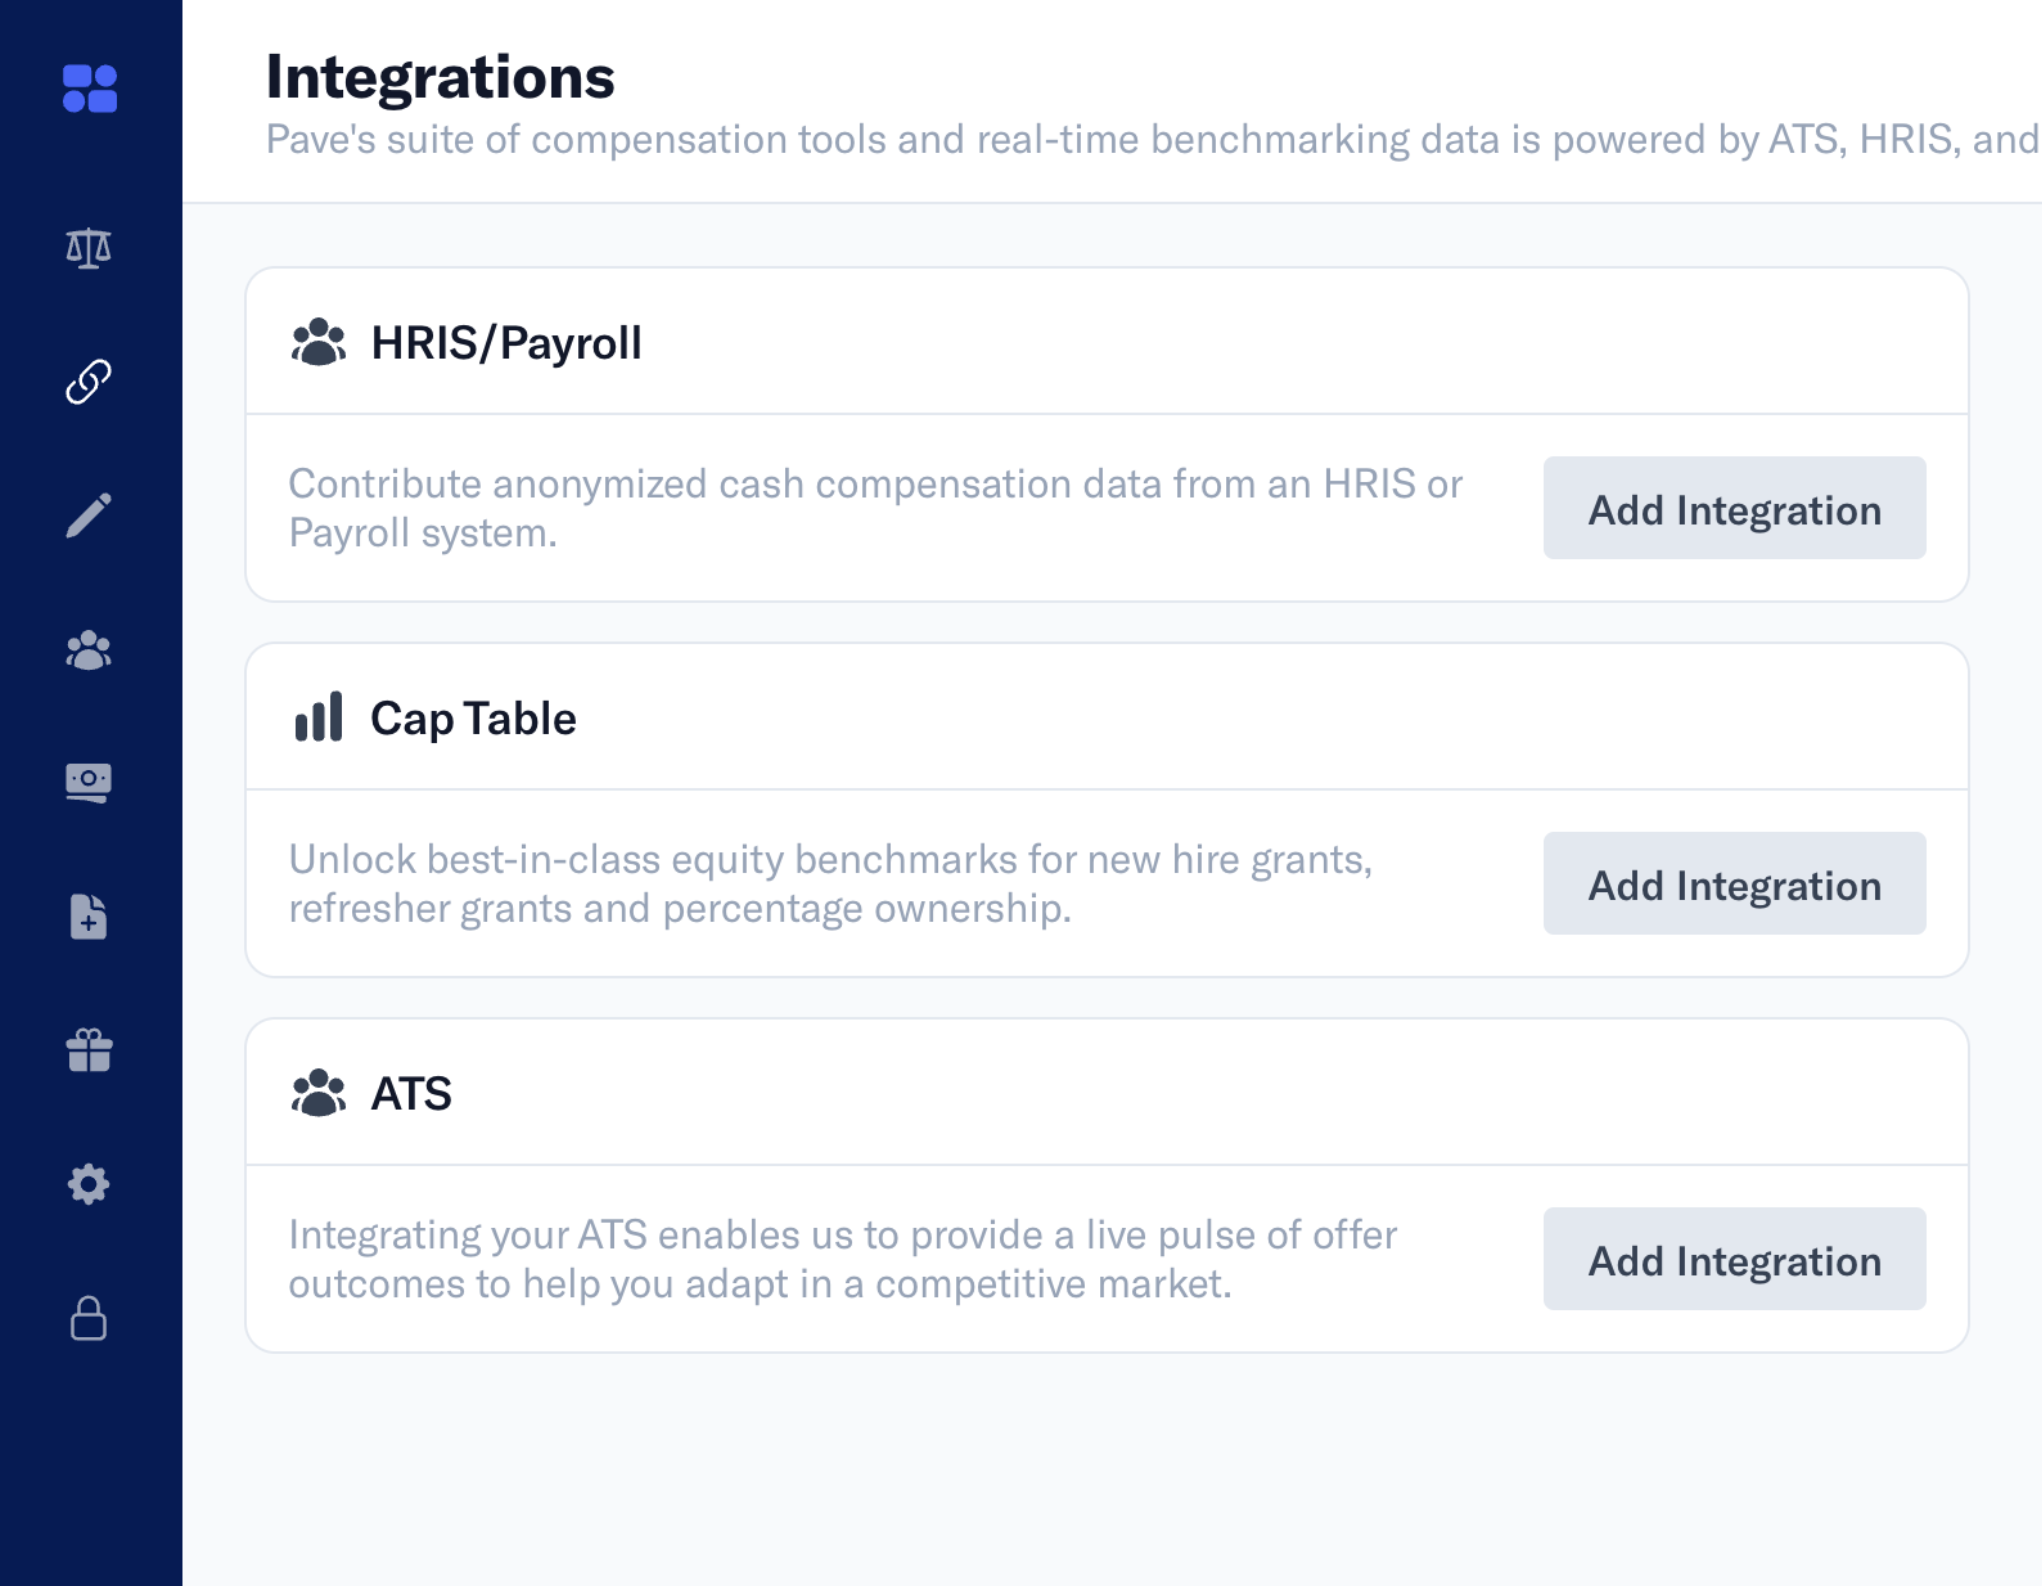 Integrations page in Pave